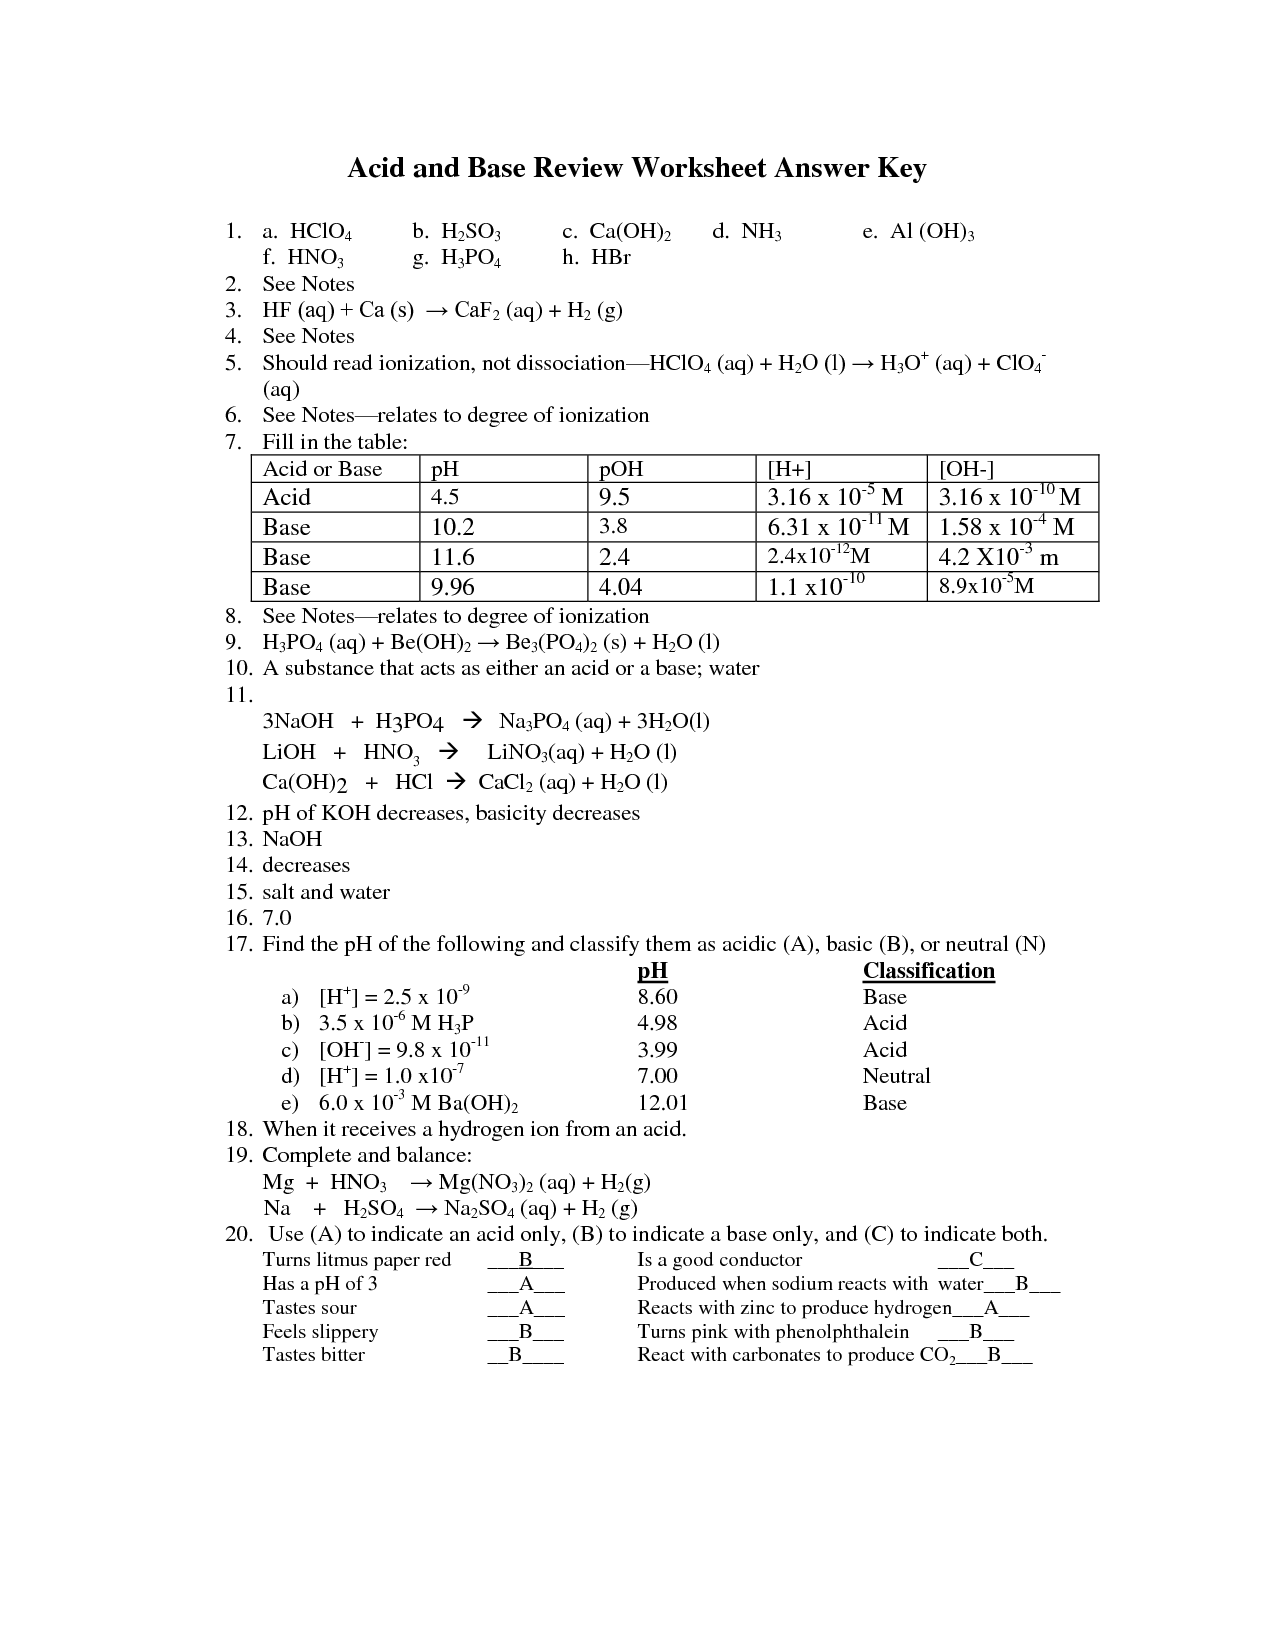 11-best-images-of-acid-and-base-reactions-worksheet-acids-and-bases